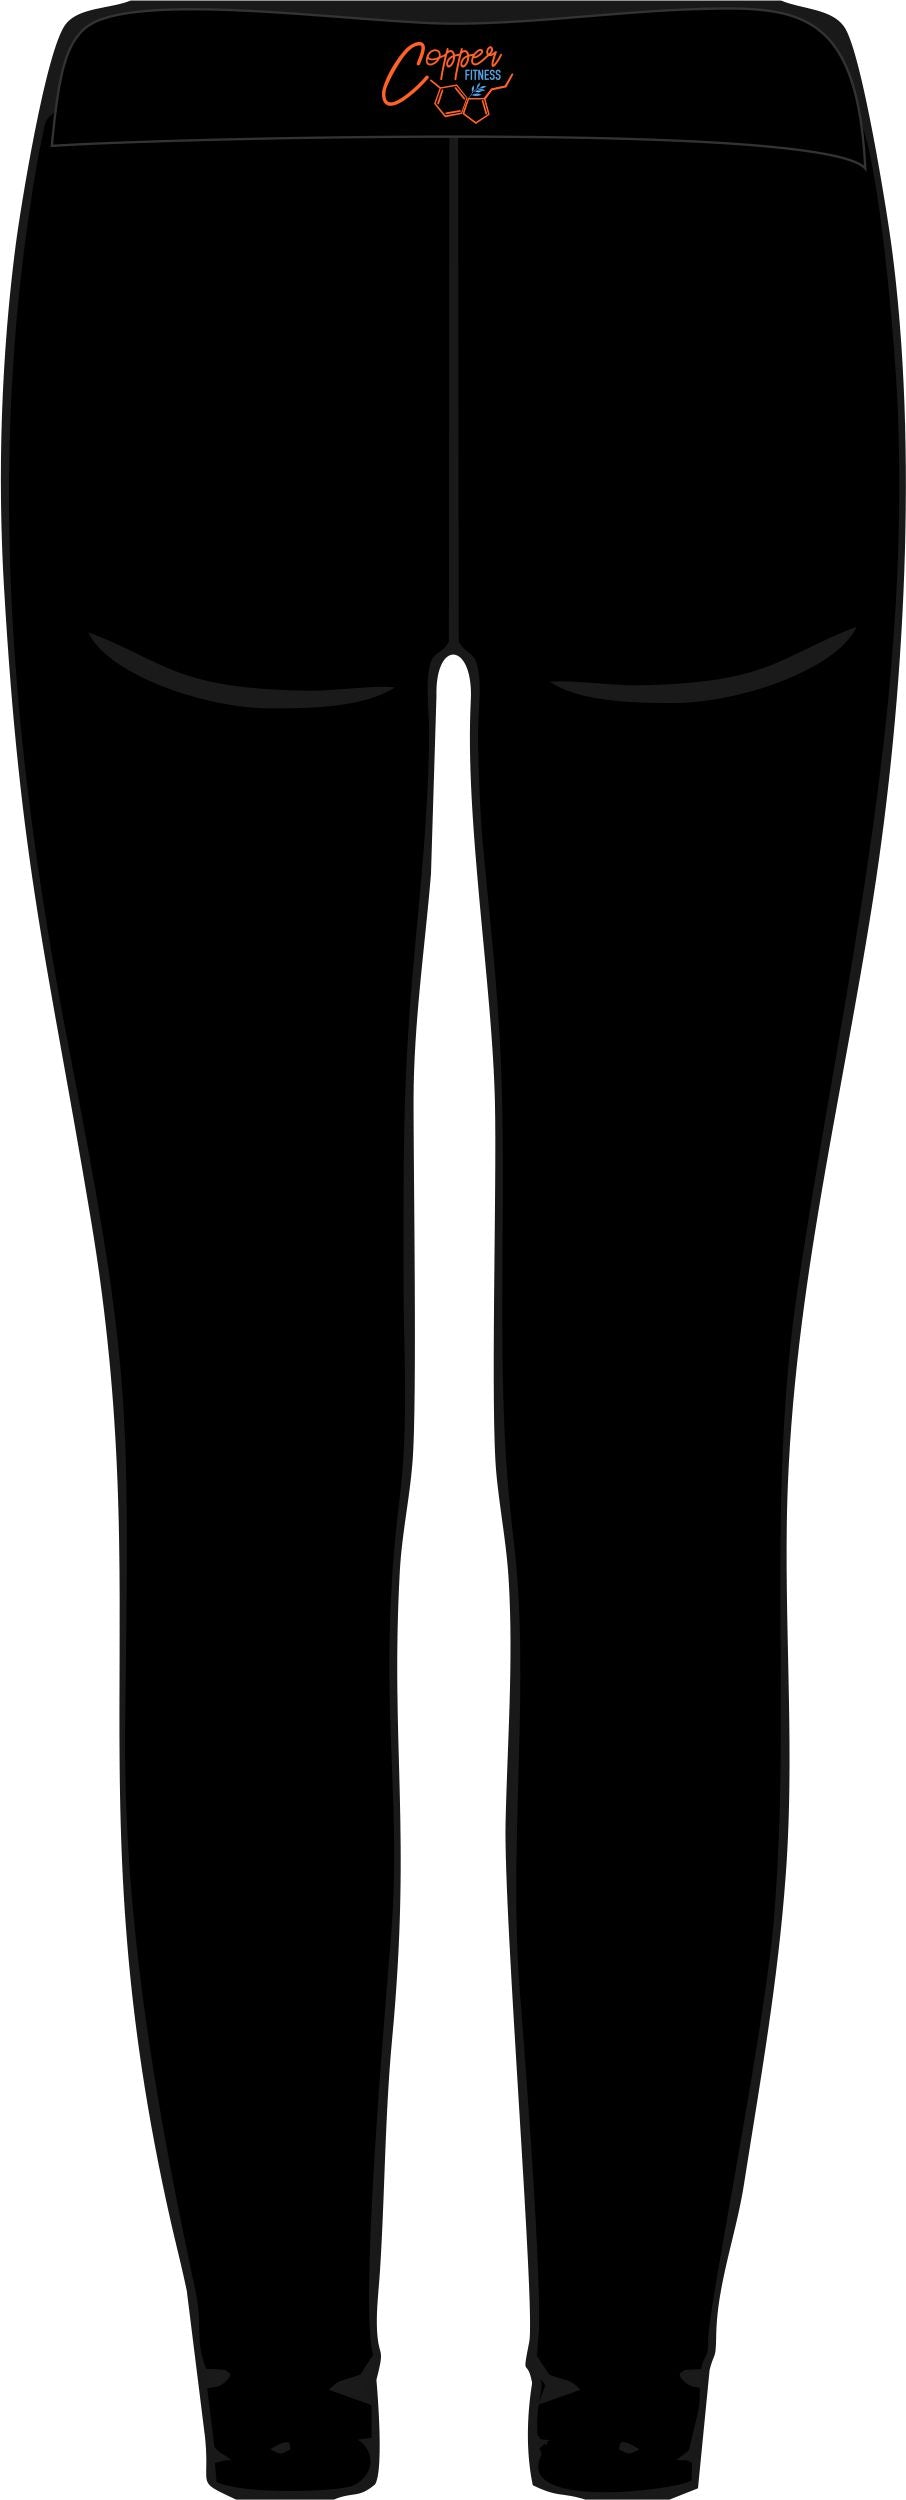 Legging (NO REFUNDS OR EXCHANGES)